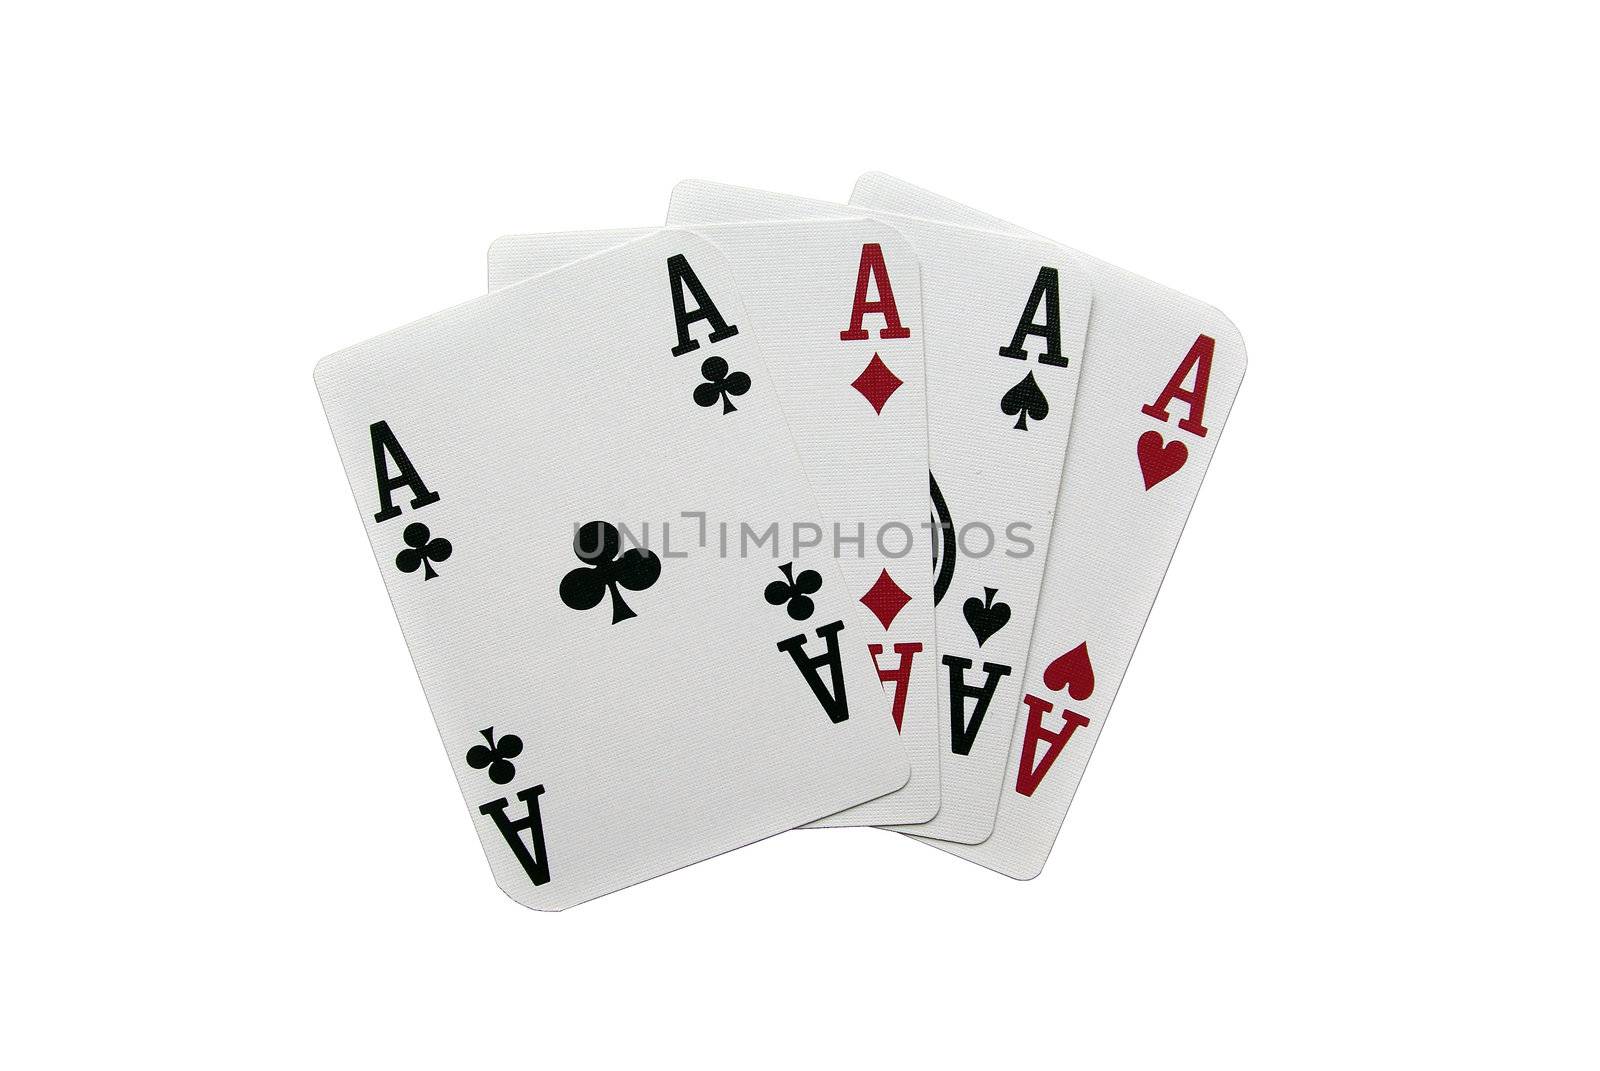 Poker cards showing a four-to-ace combination on a white background